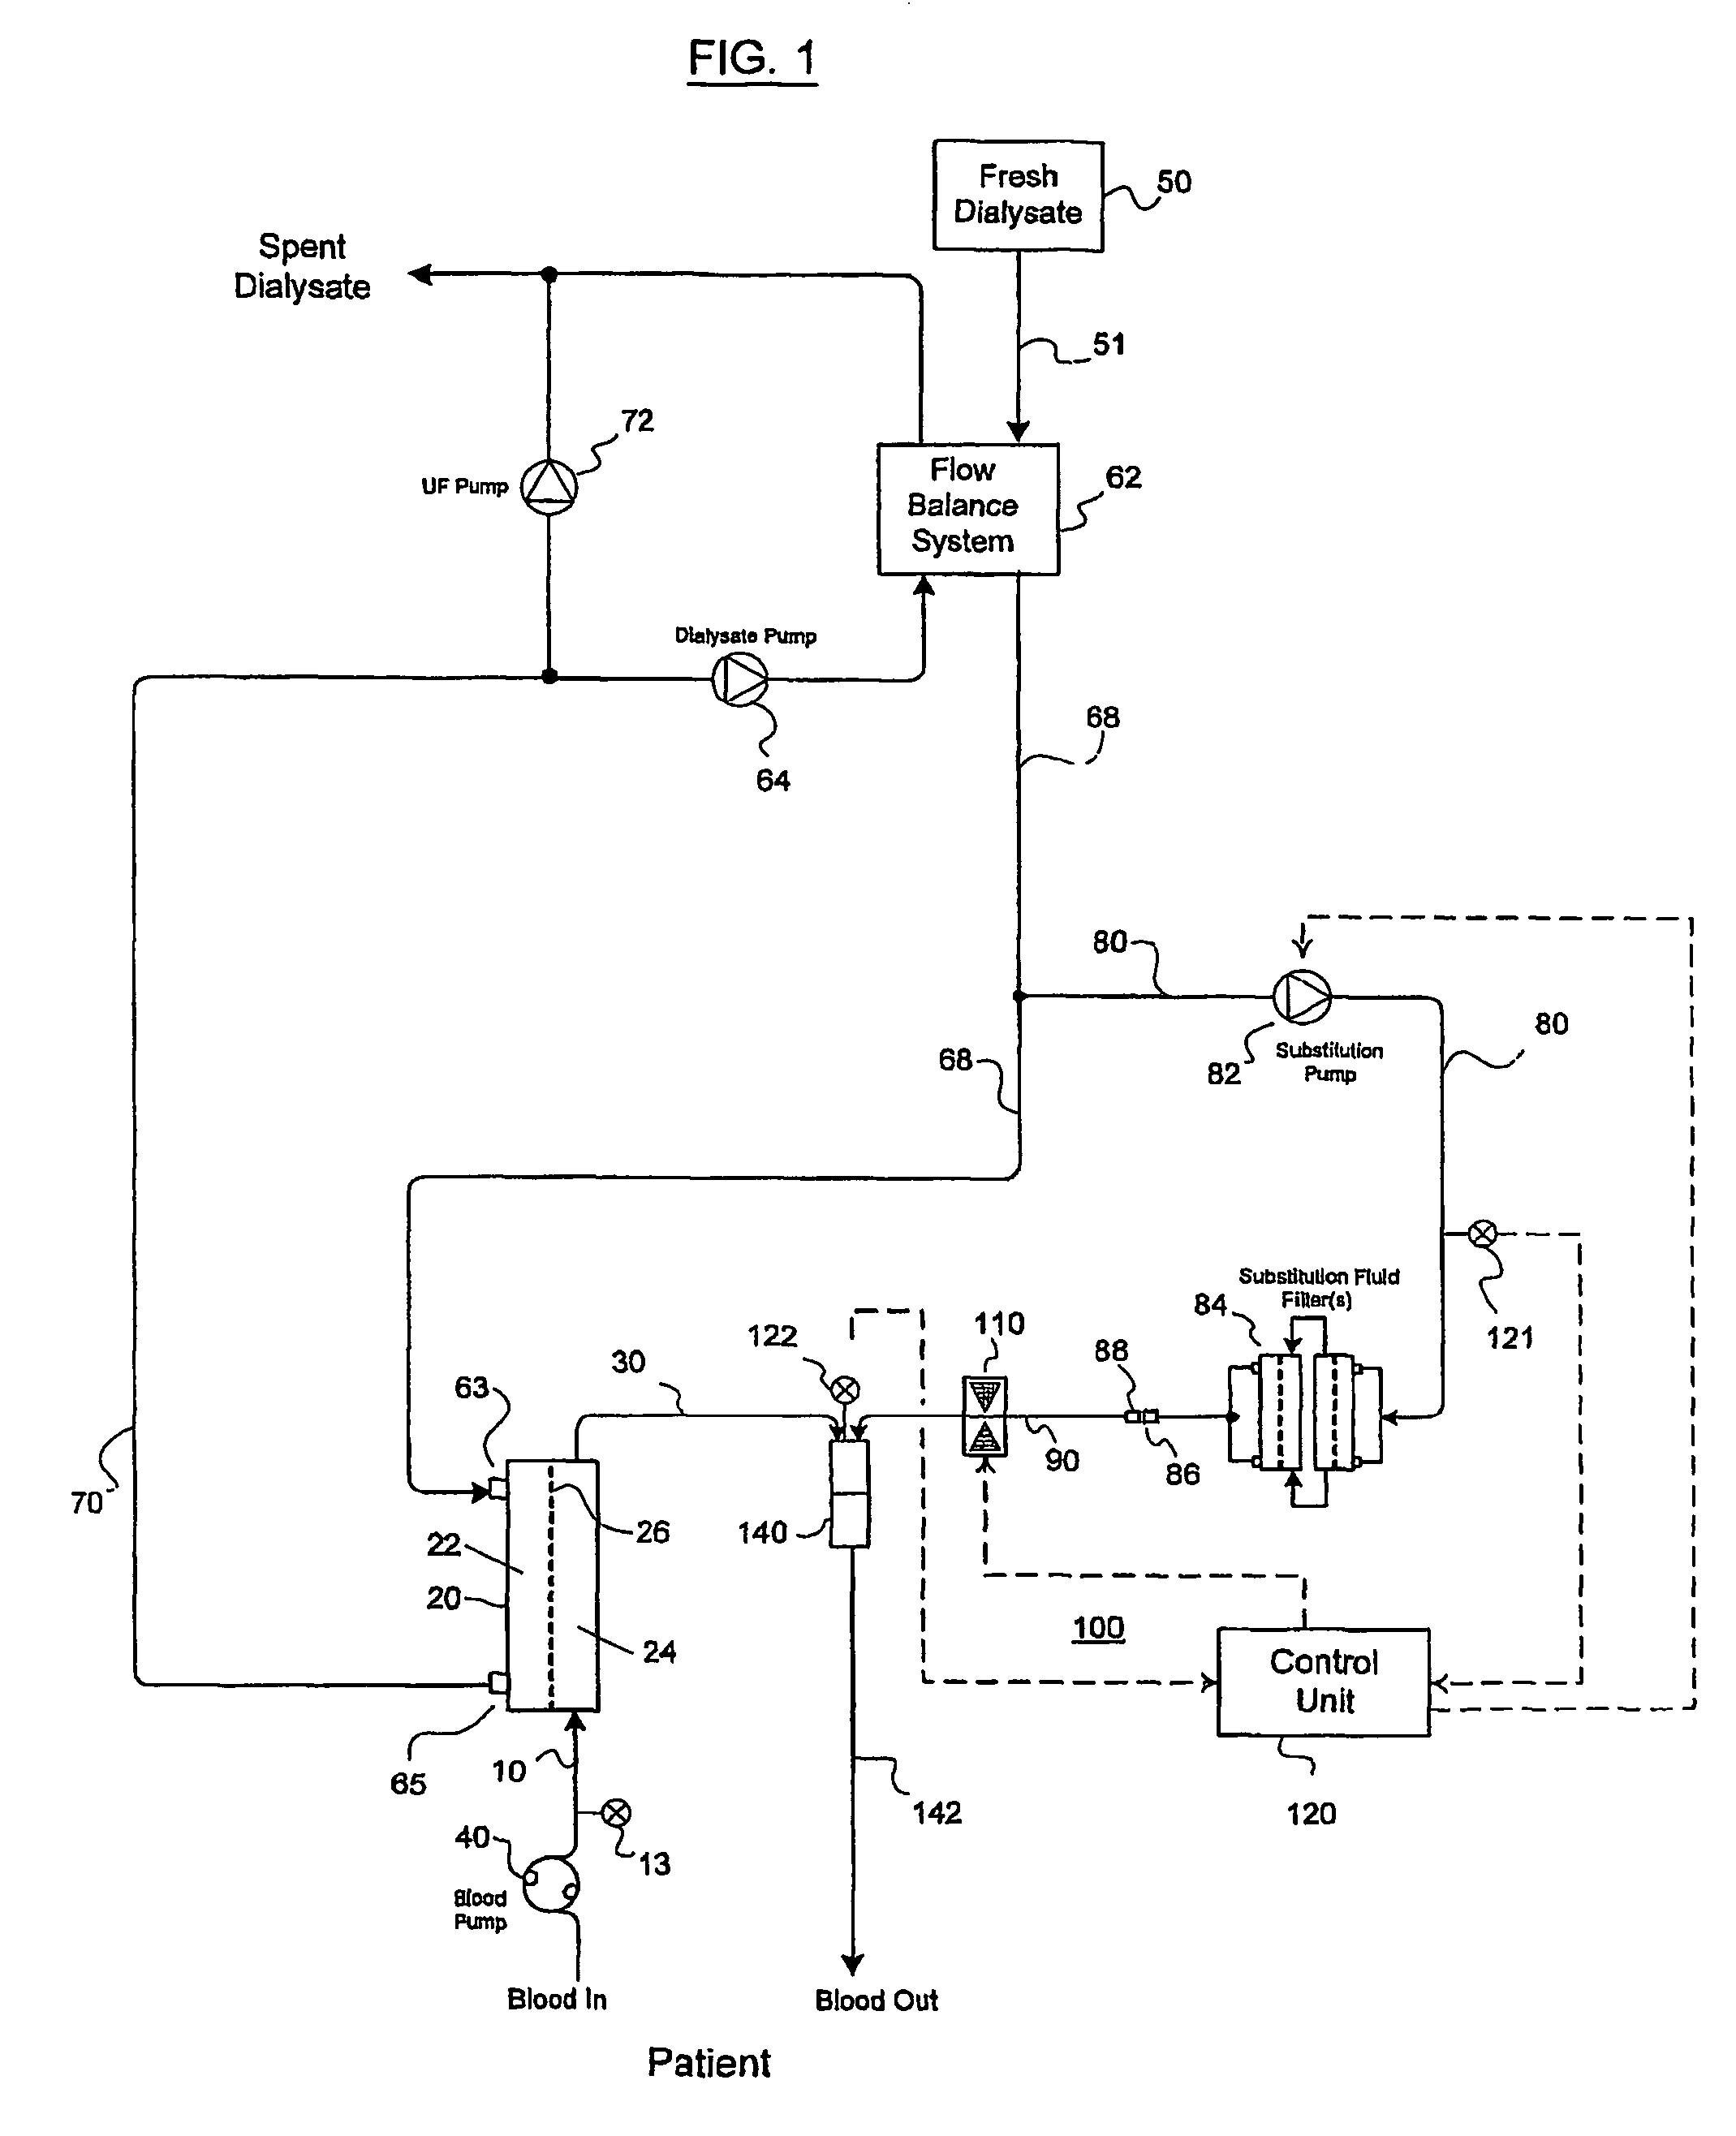 Valve mechanism for infusion fluid systems